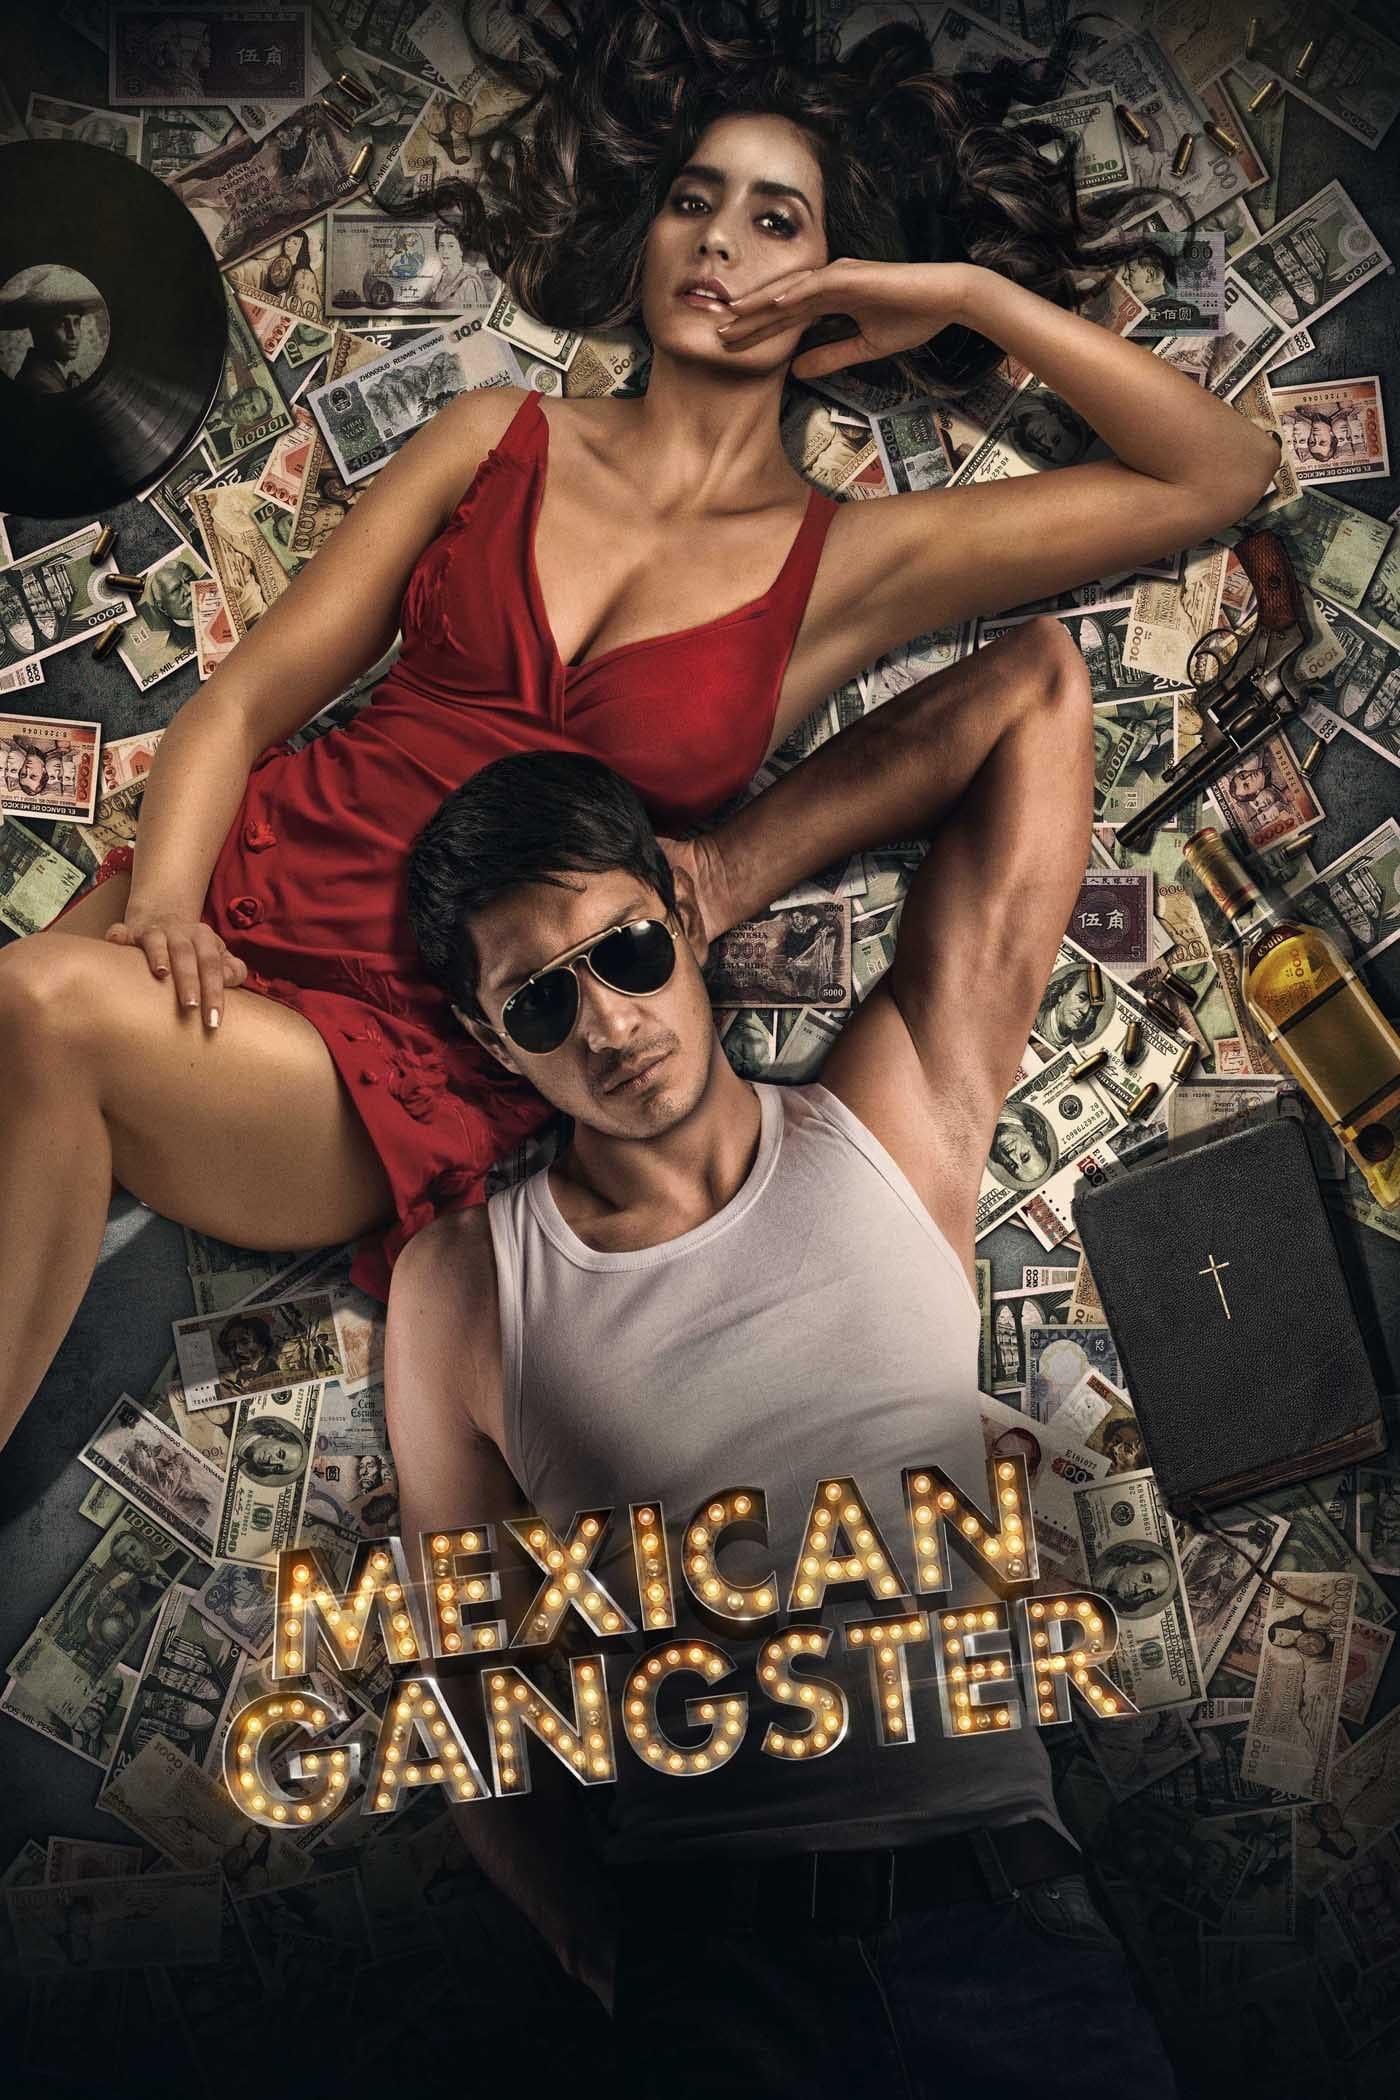 Mexican Gangster poster